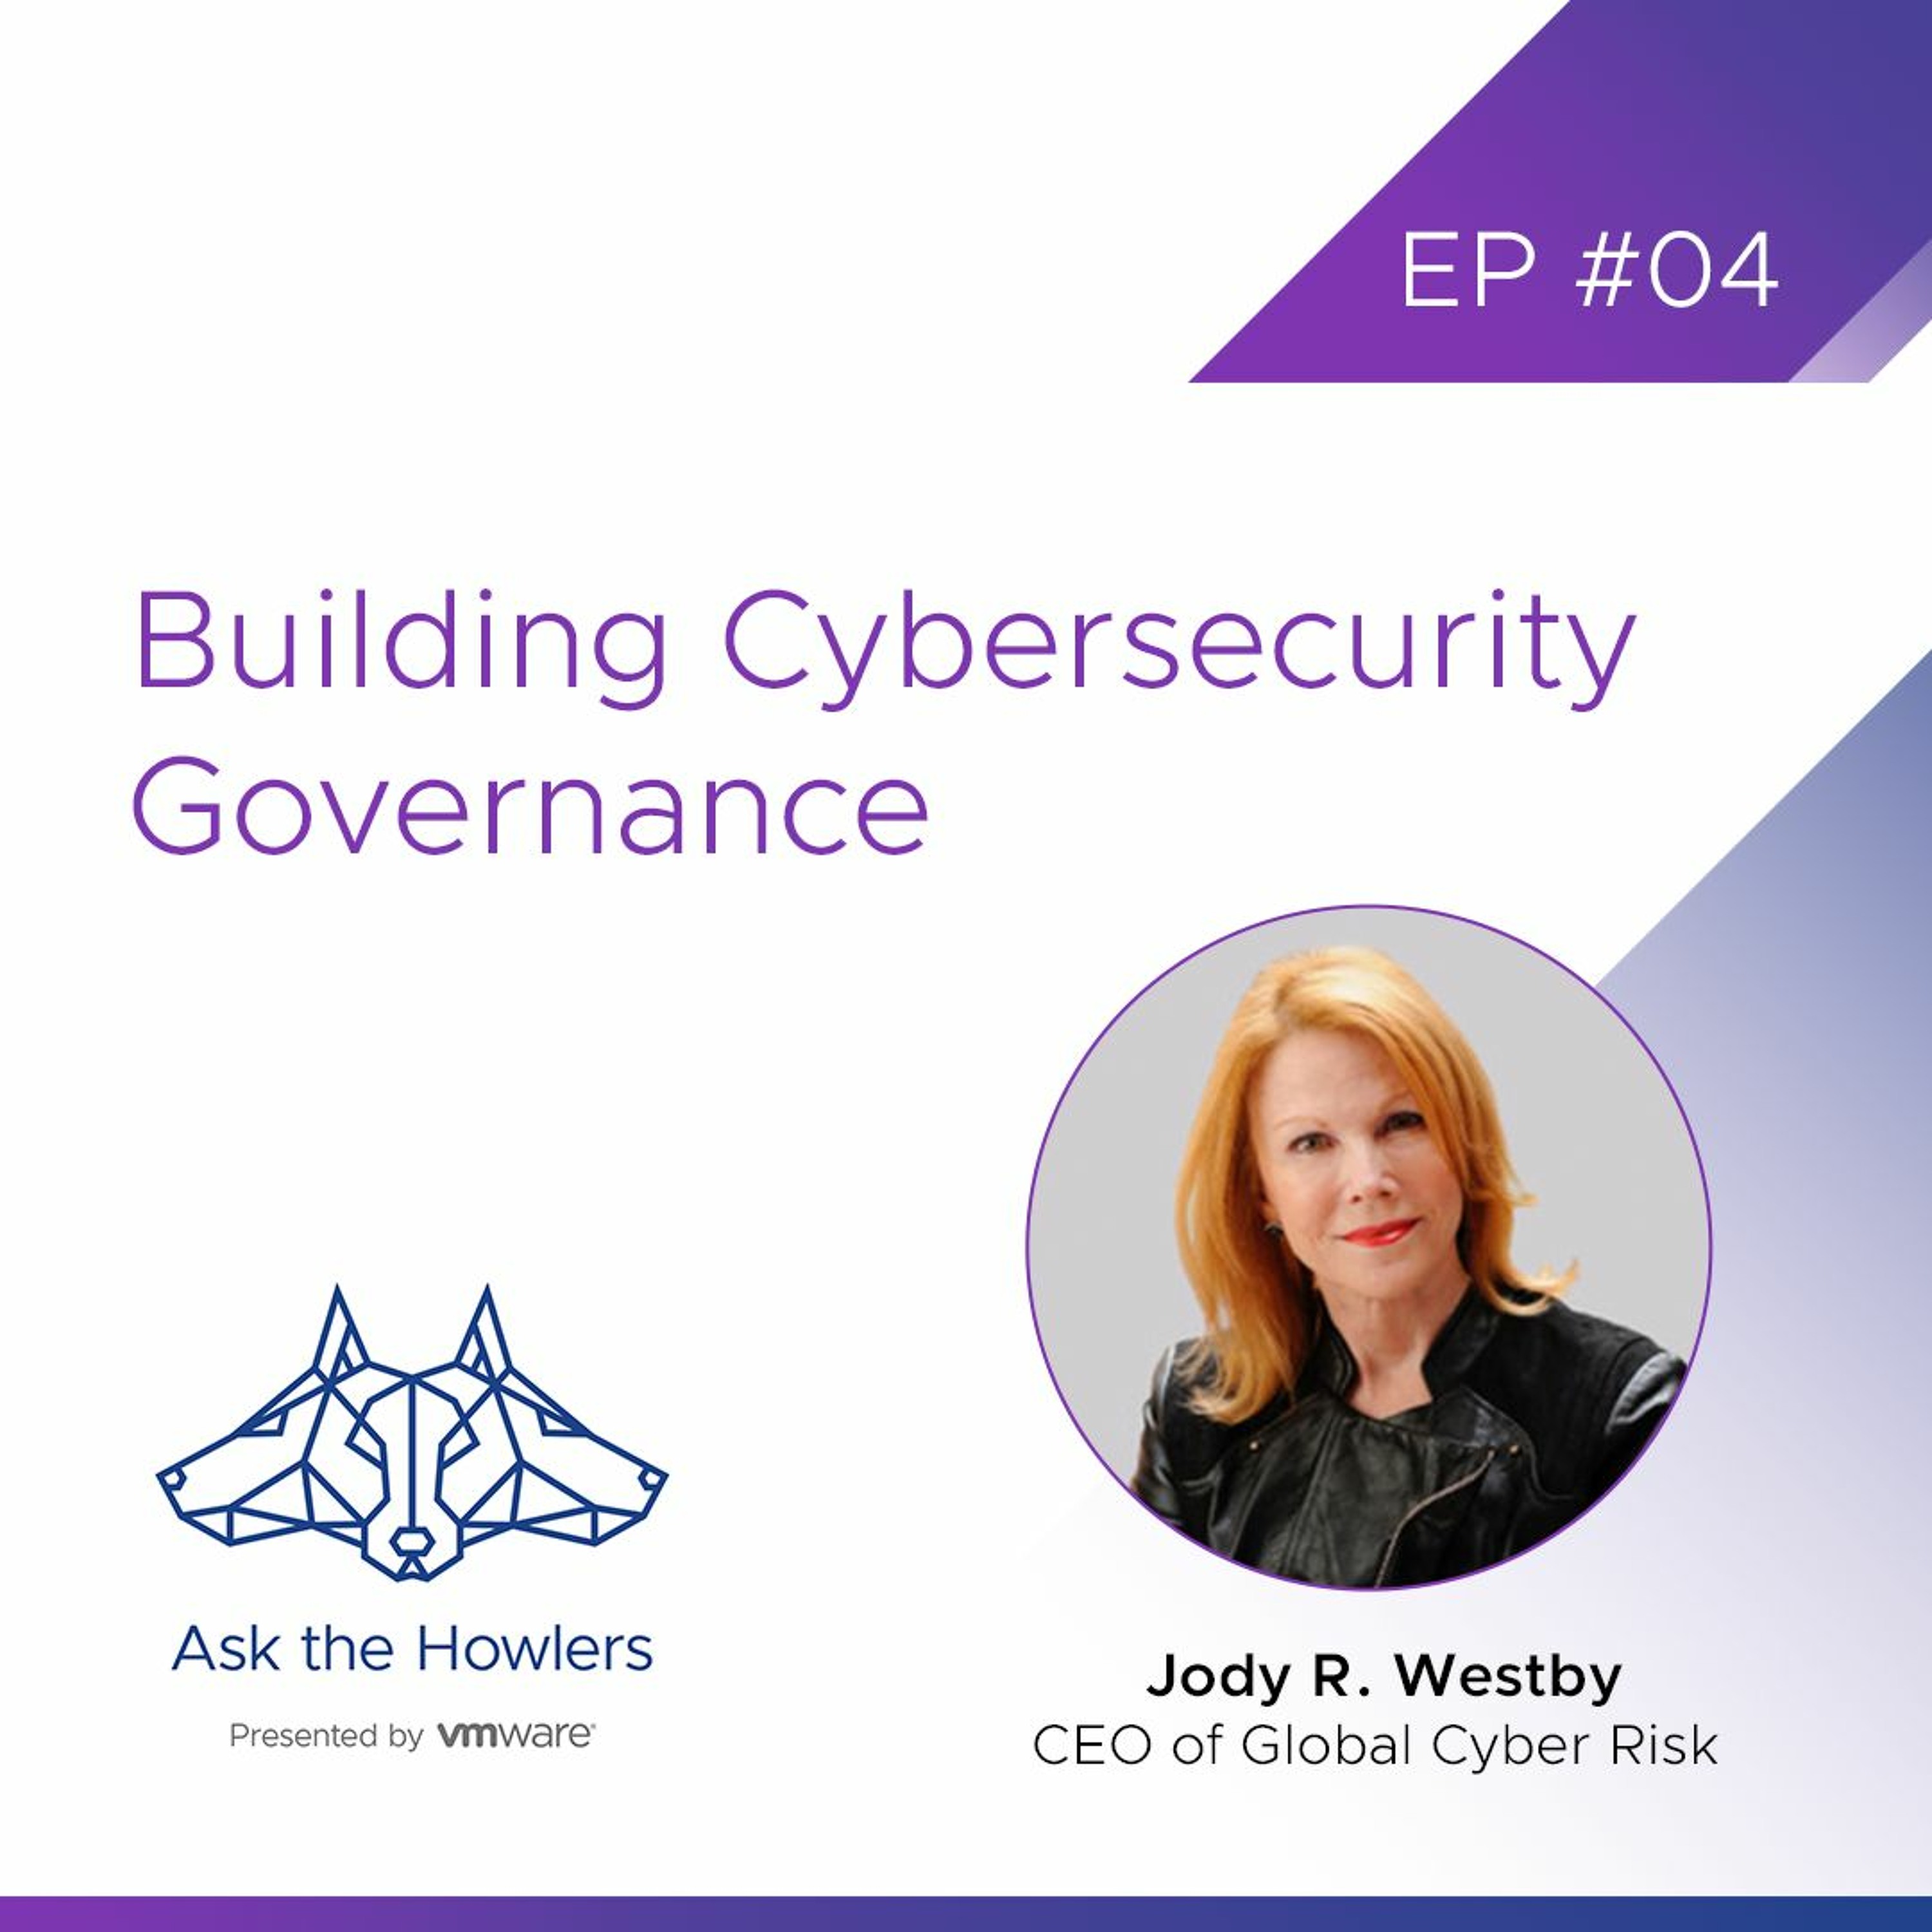 Ask the Howlers | Building Cybersecurity Governance with Jody R. Westby